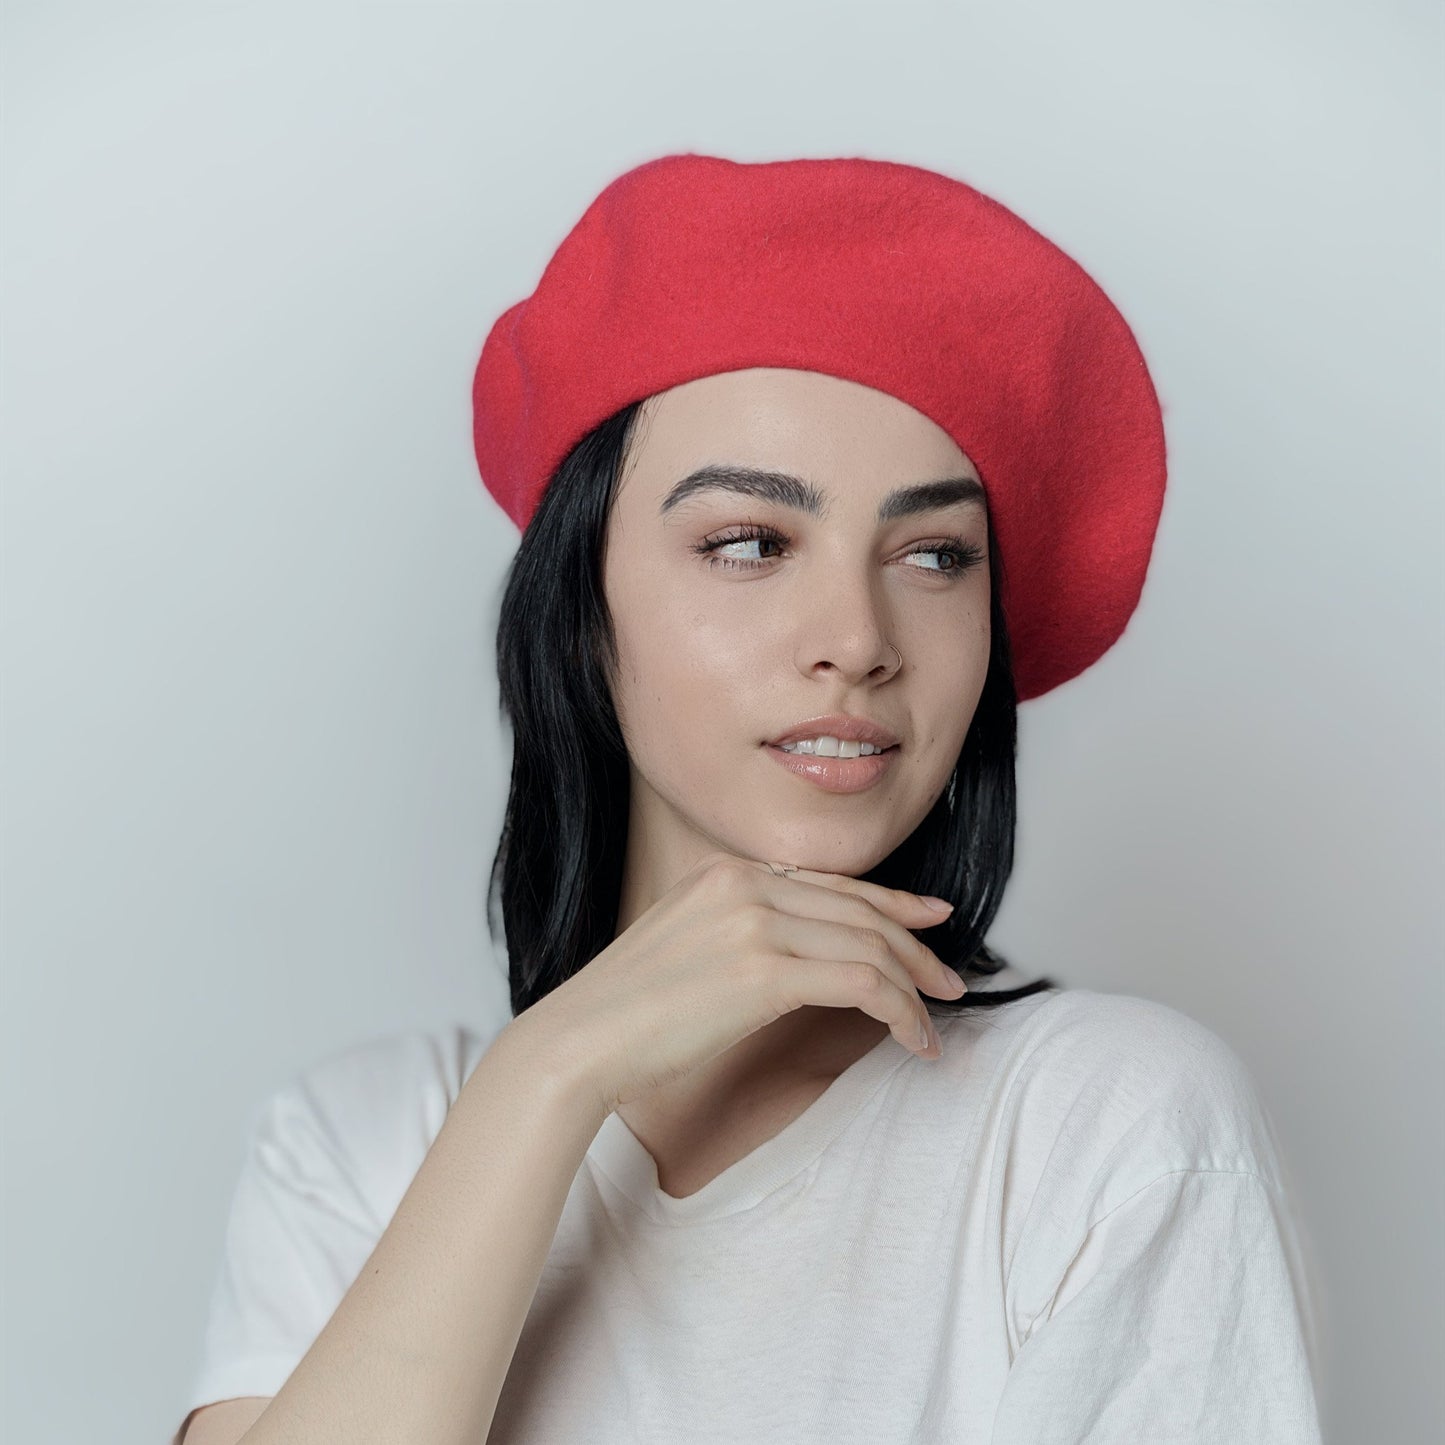 Oversize Wool Beret for Women(Fits for large head).